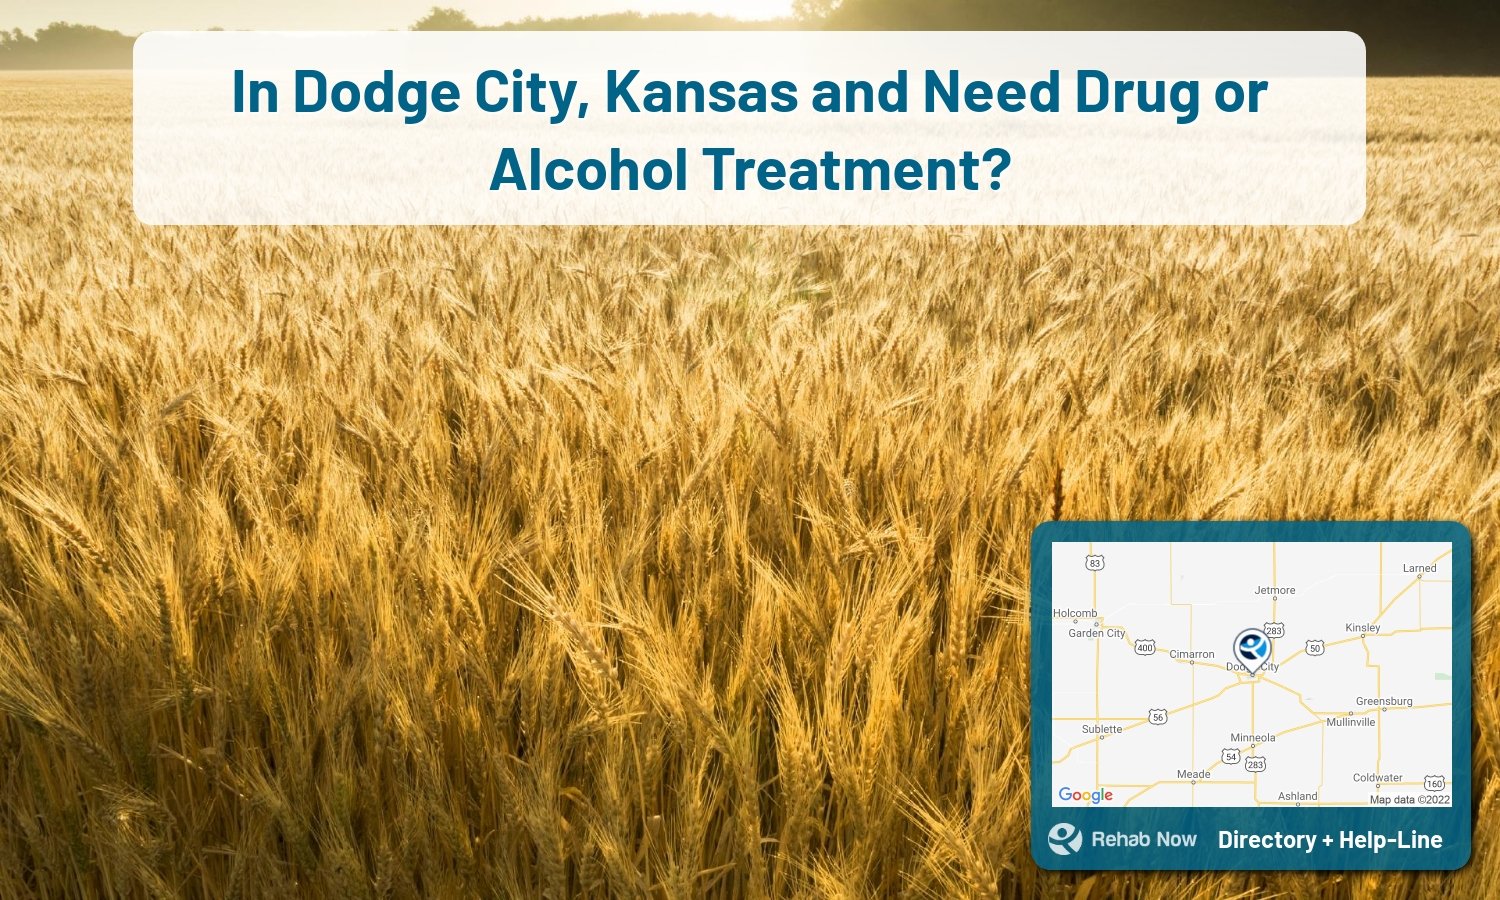 Dodge City, KS Treatment Centers. Find drug rehab in Dodge City, Kansas, or detox and treatment programs. Get the right help now!